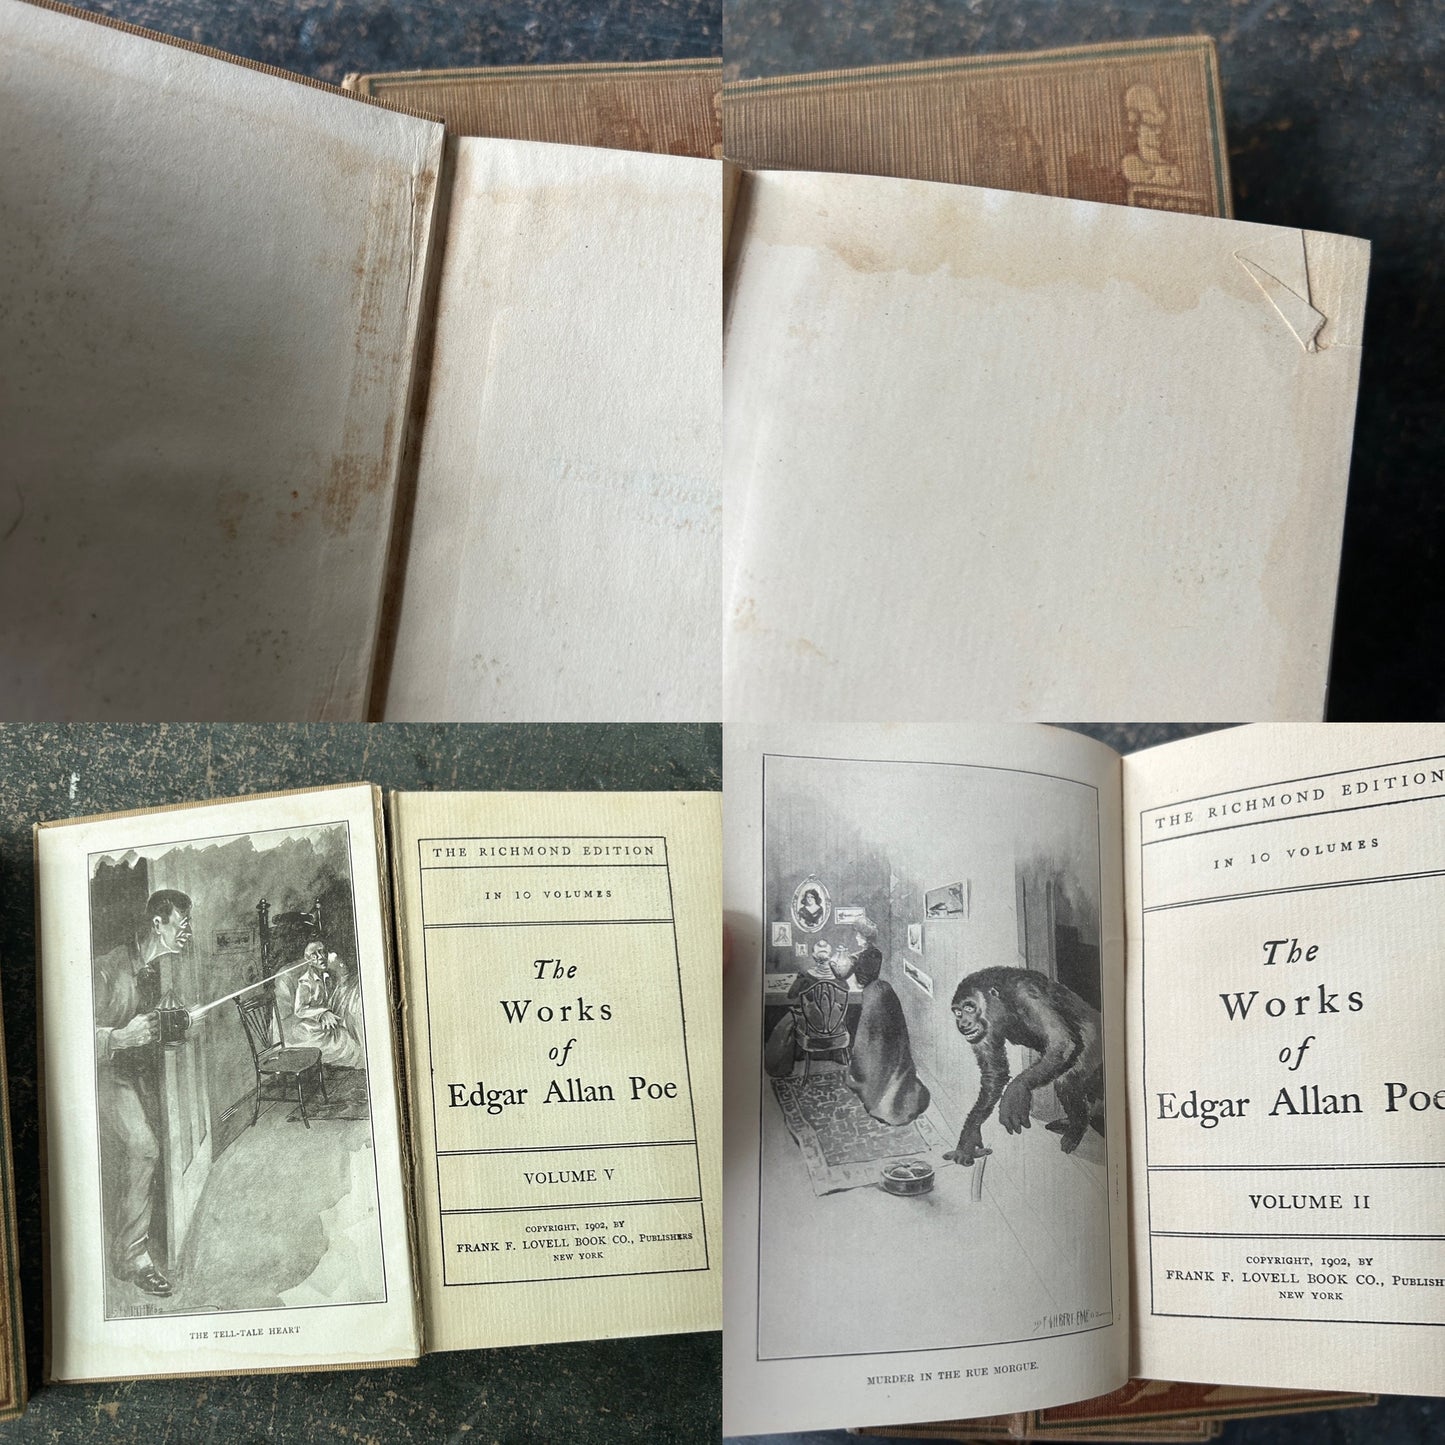 Antique Edgar Allan Poe 10 Volume Book Set, The Richmond Edition in 10 volumes, 1902, SEE CONDITION NOTES